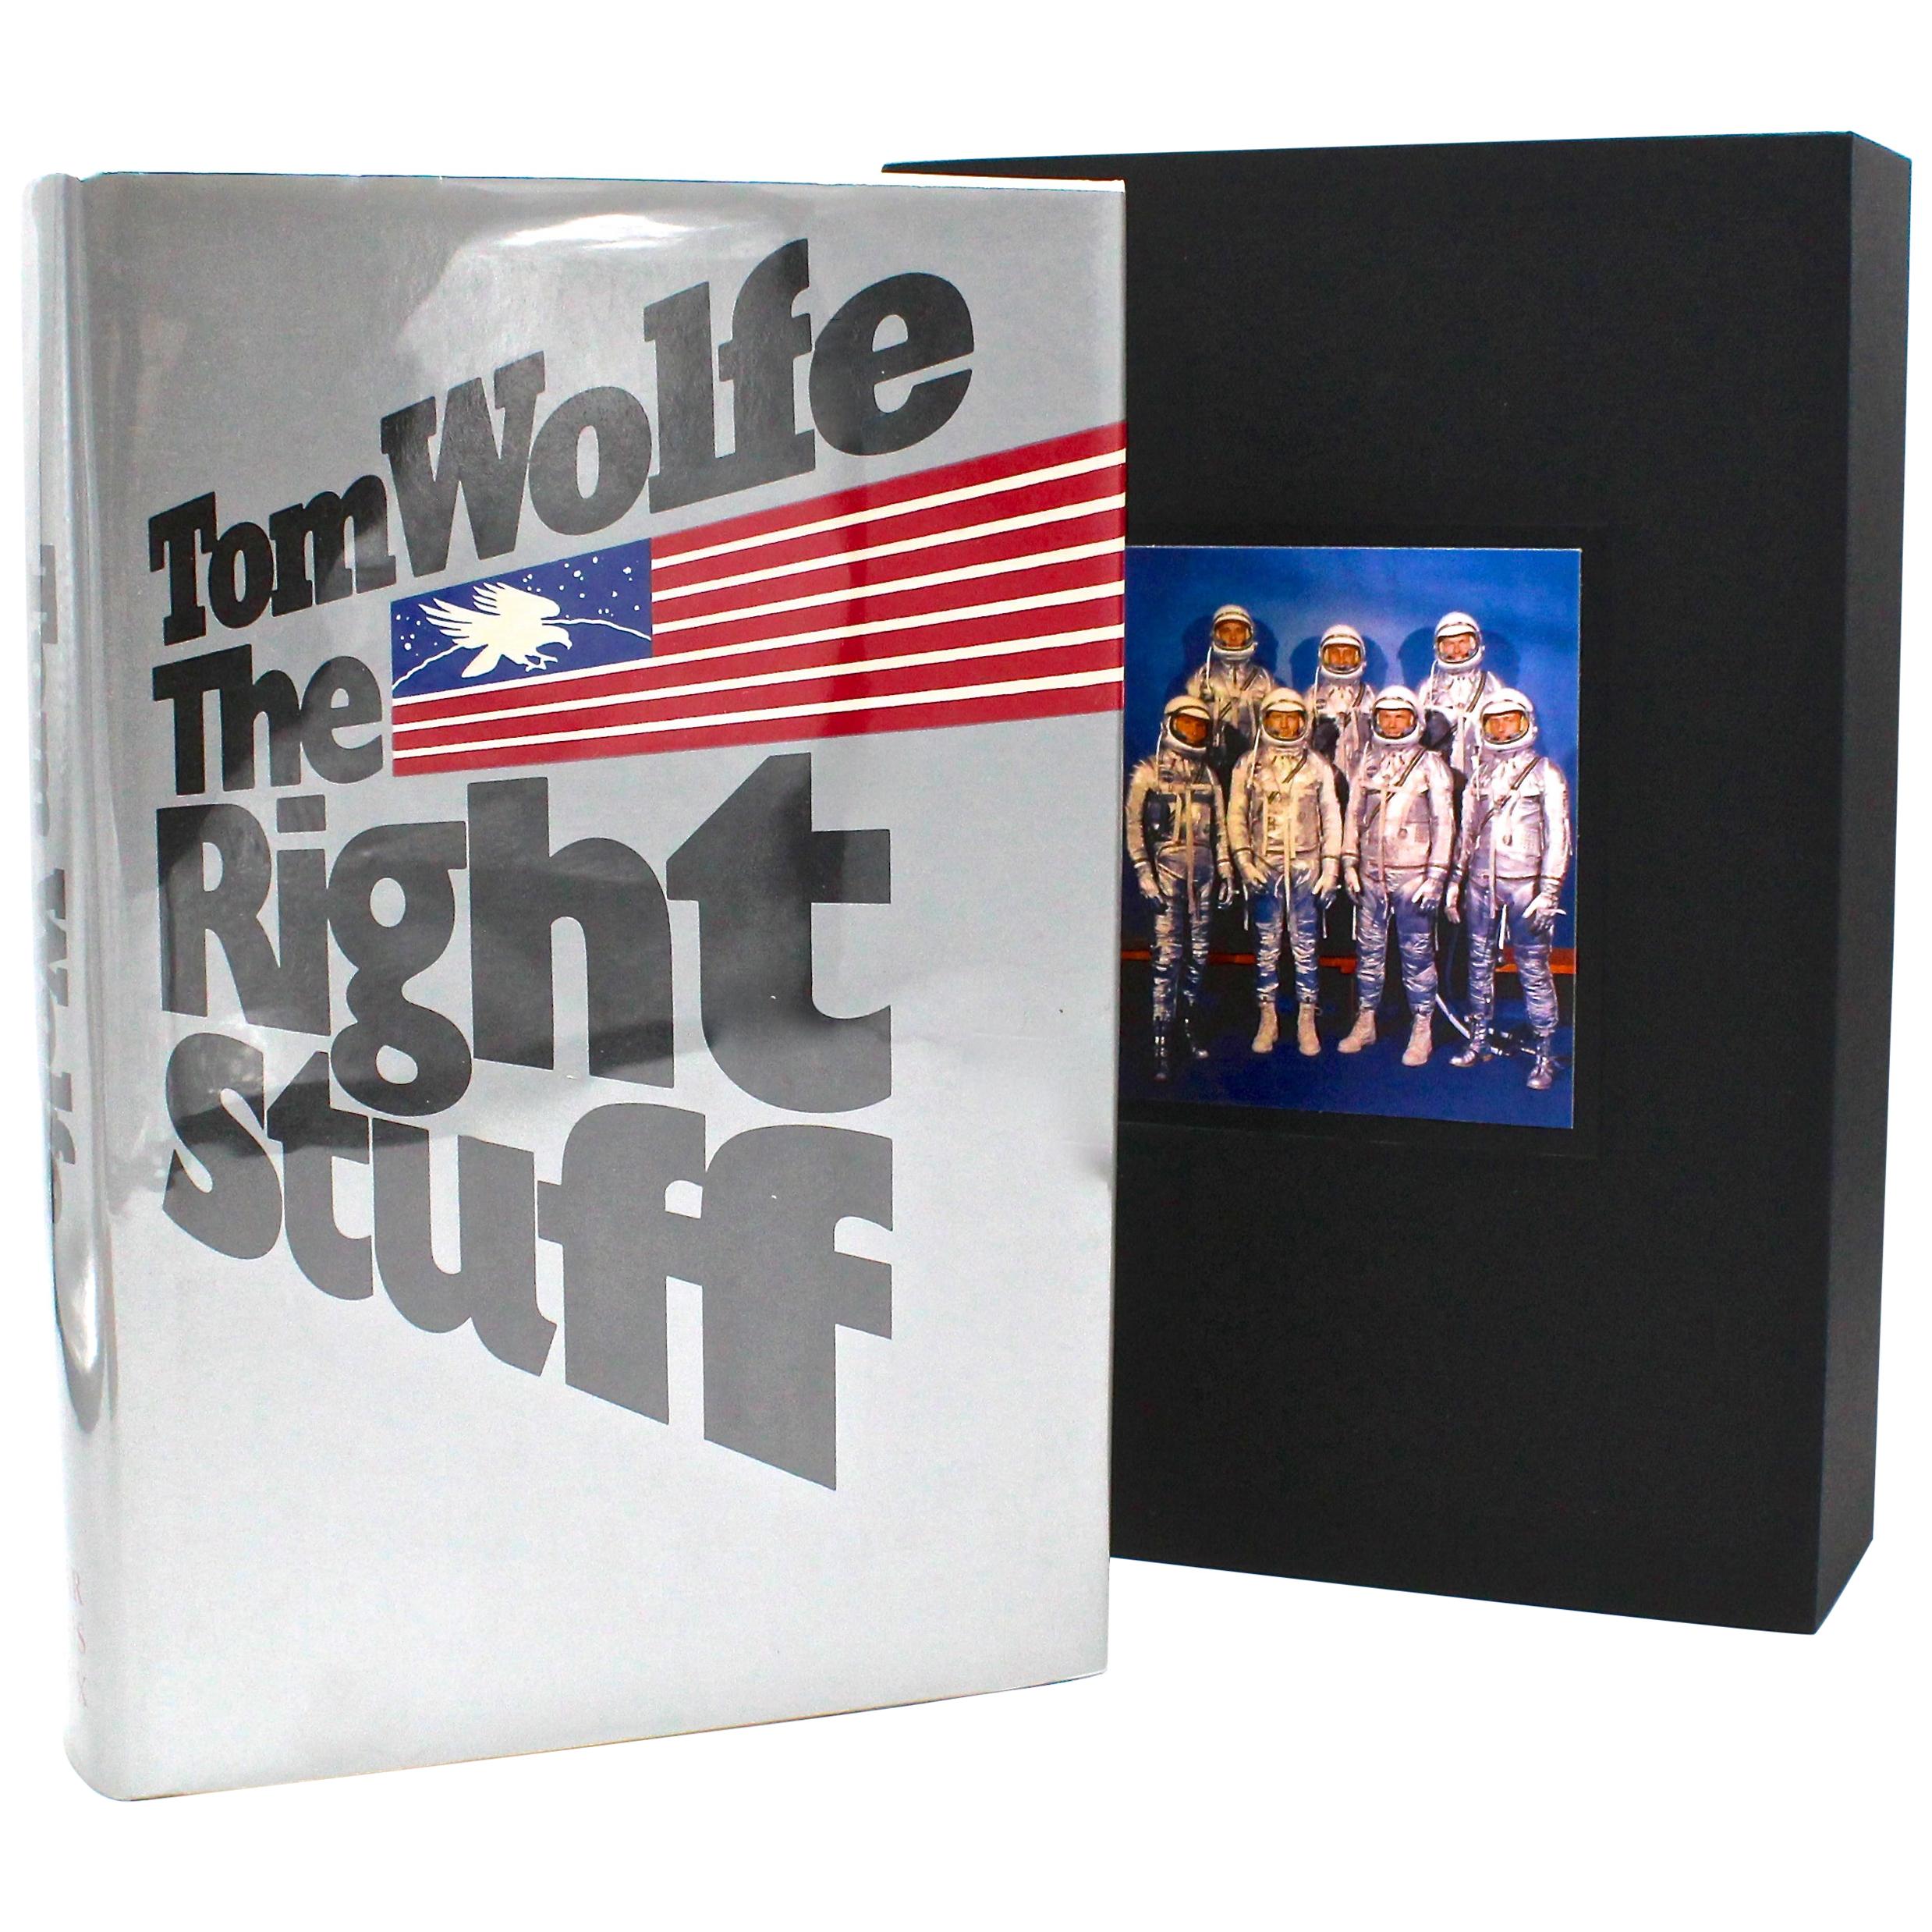 "The Right Stuff" Signed by Tom Wolfe, First Edition, First Issue, 1979